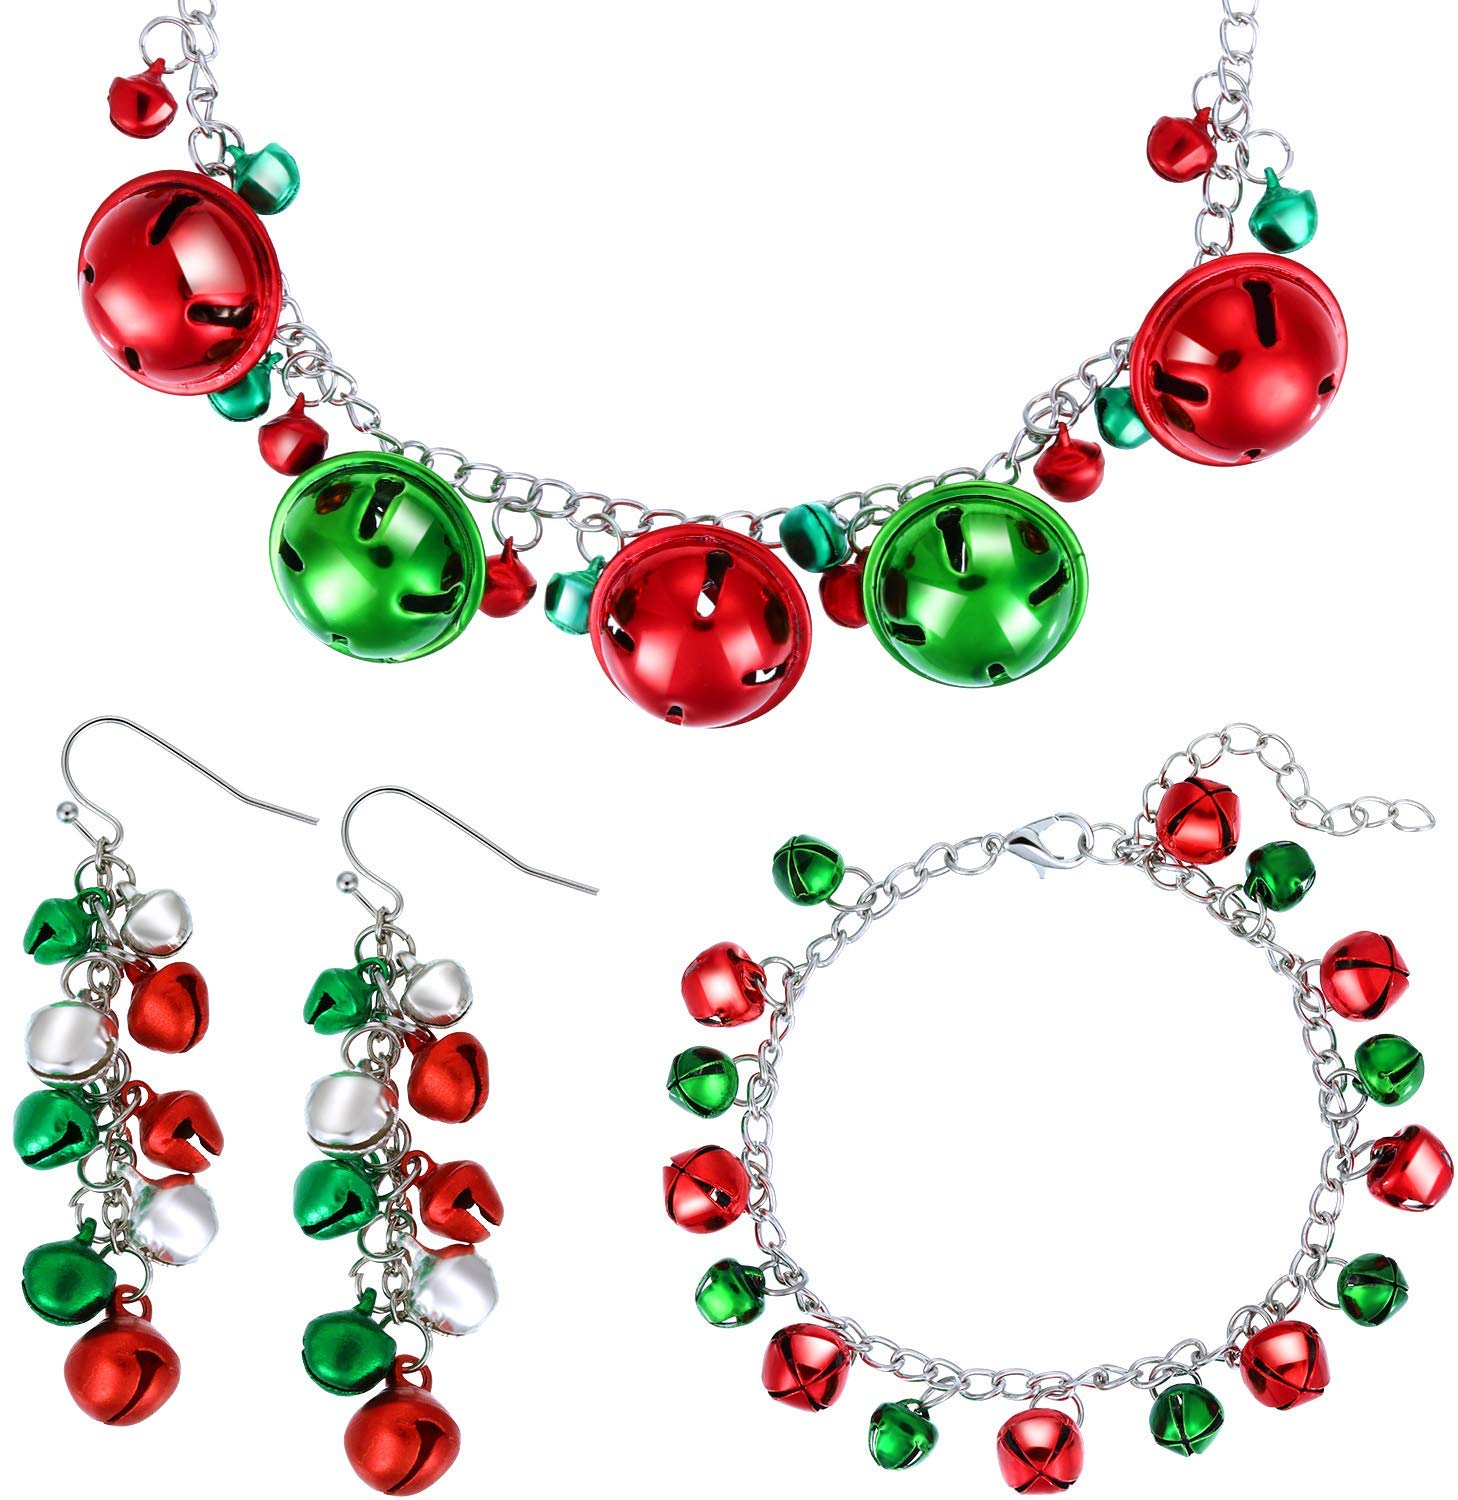 Christmas Bell Jewelry Set Includes Bells Necklace